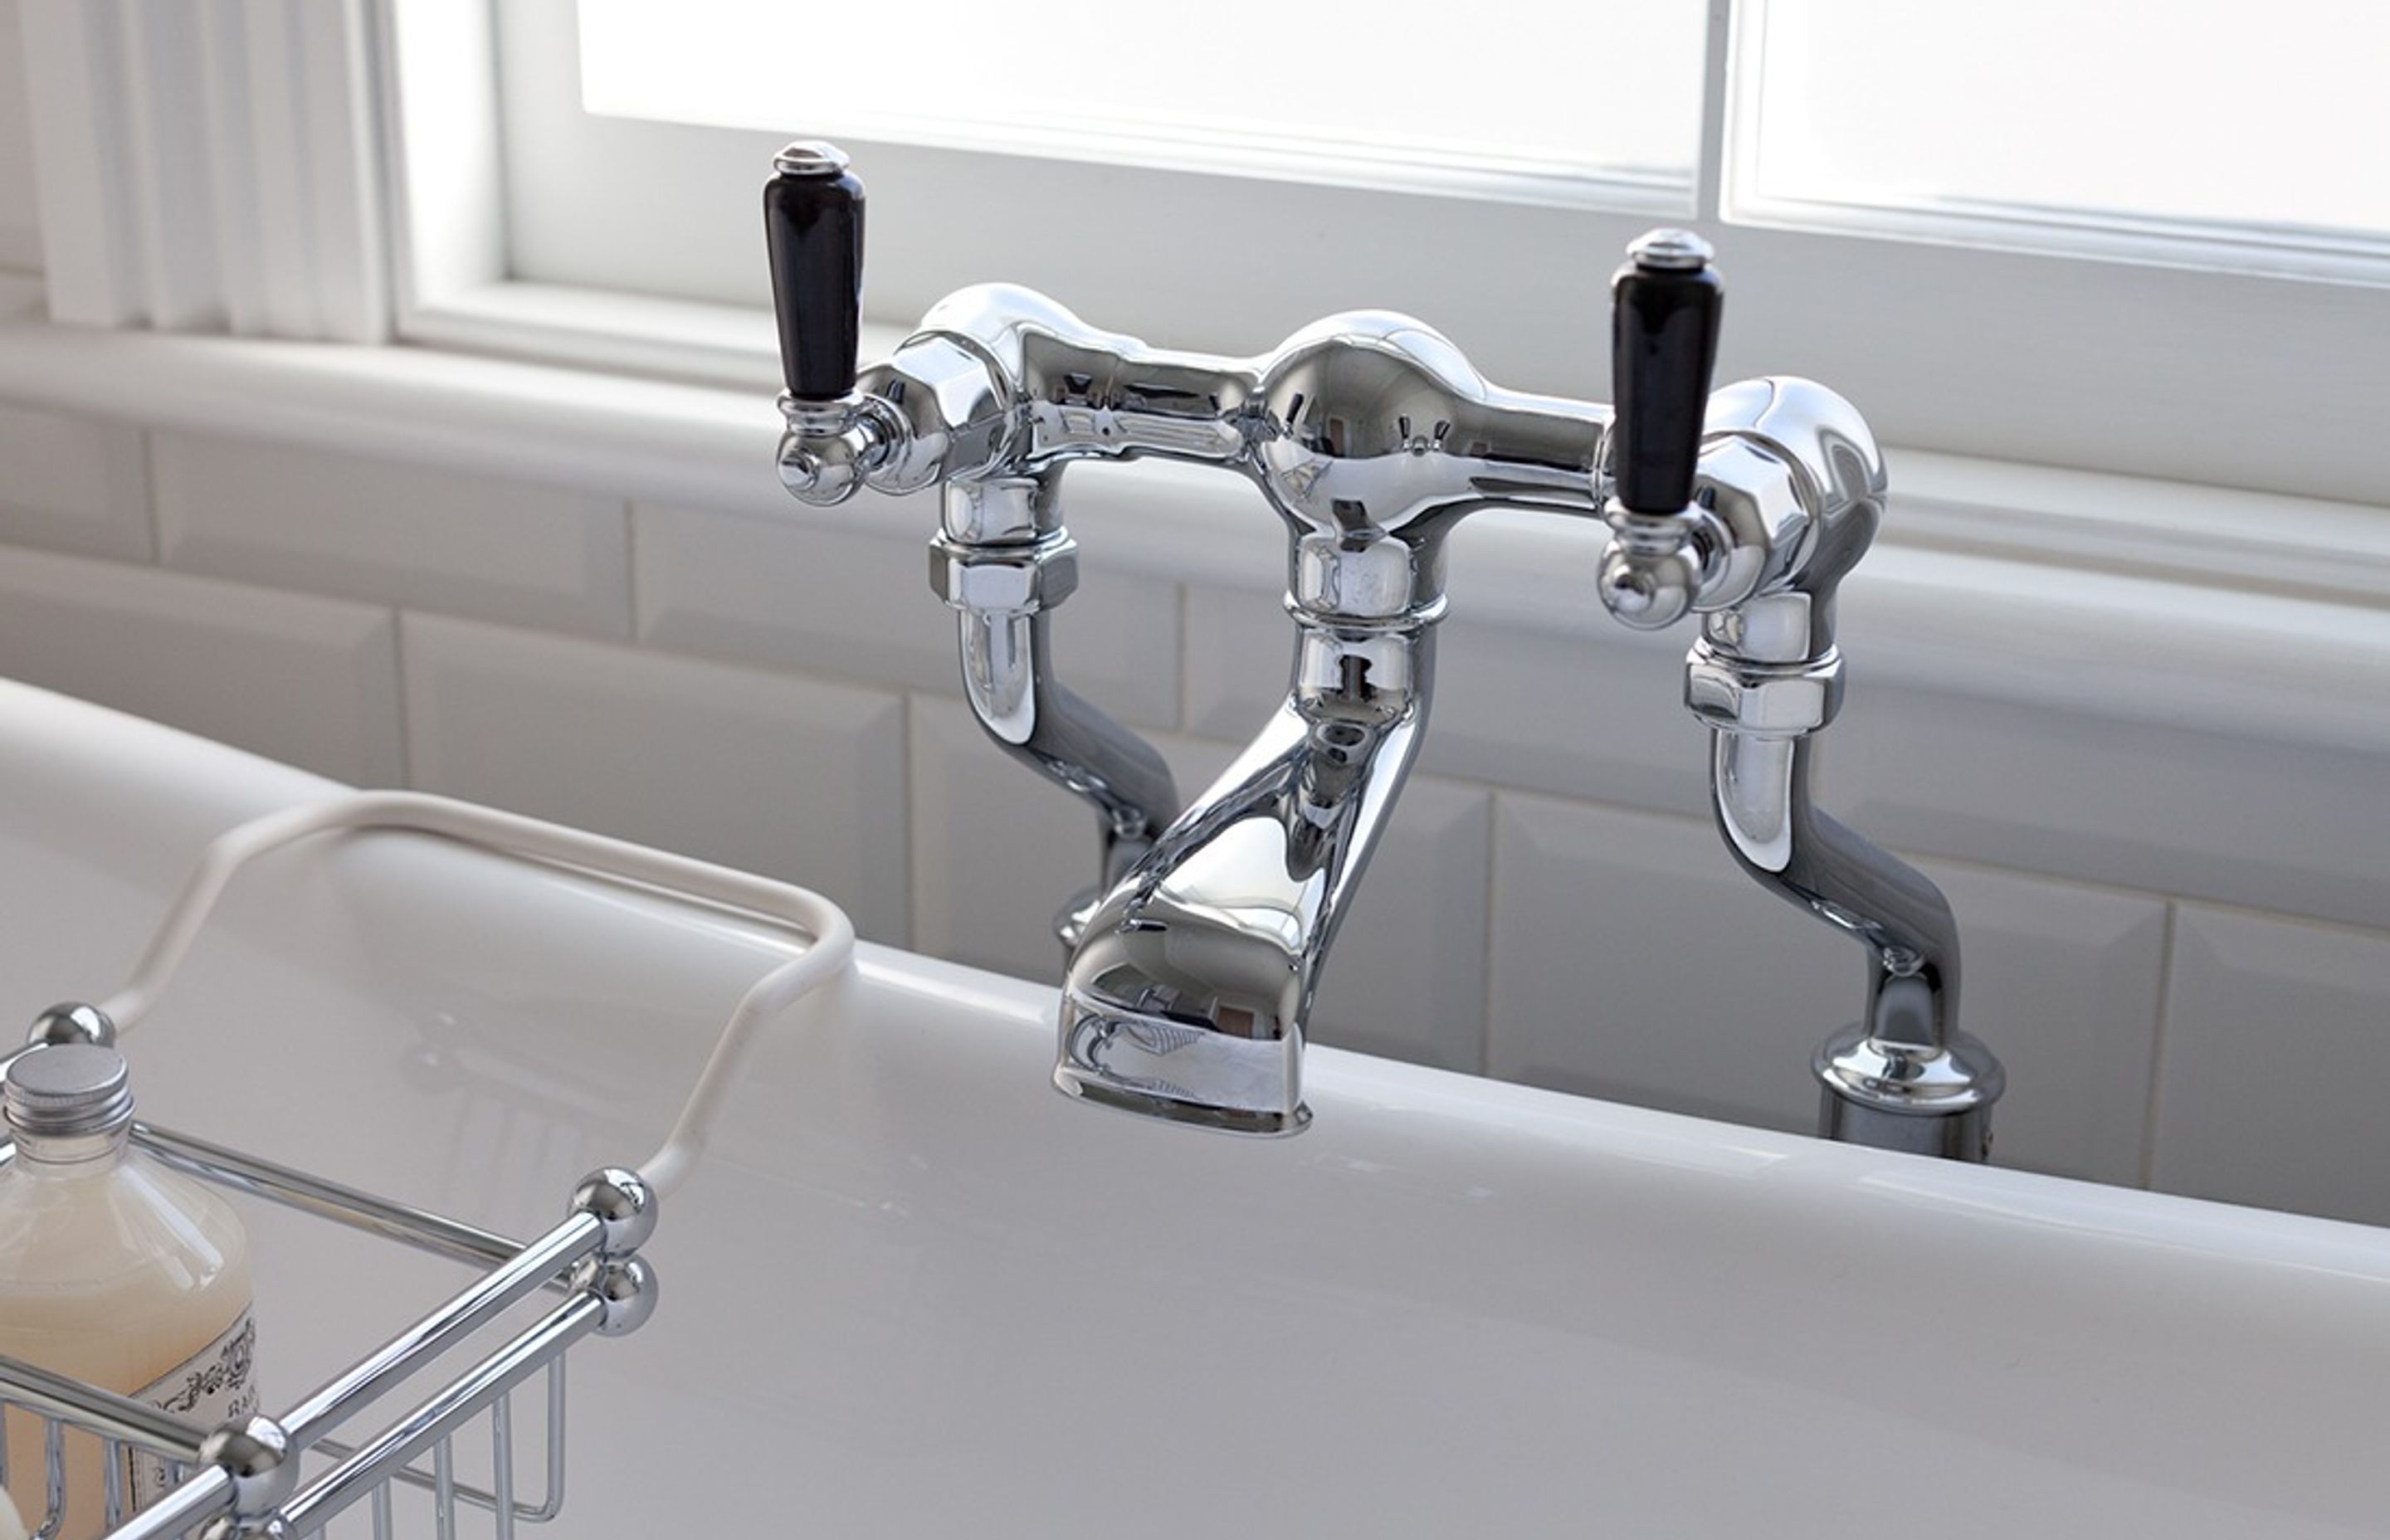 The classical Bath Filler in chrome with black porcelain levers